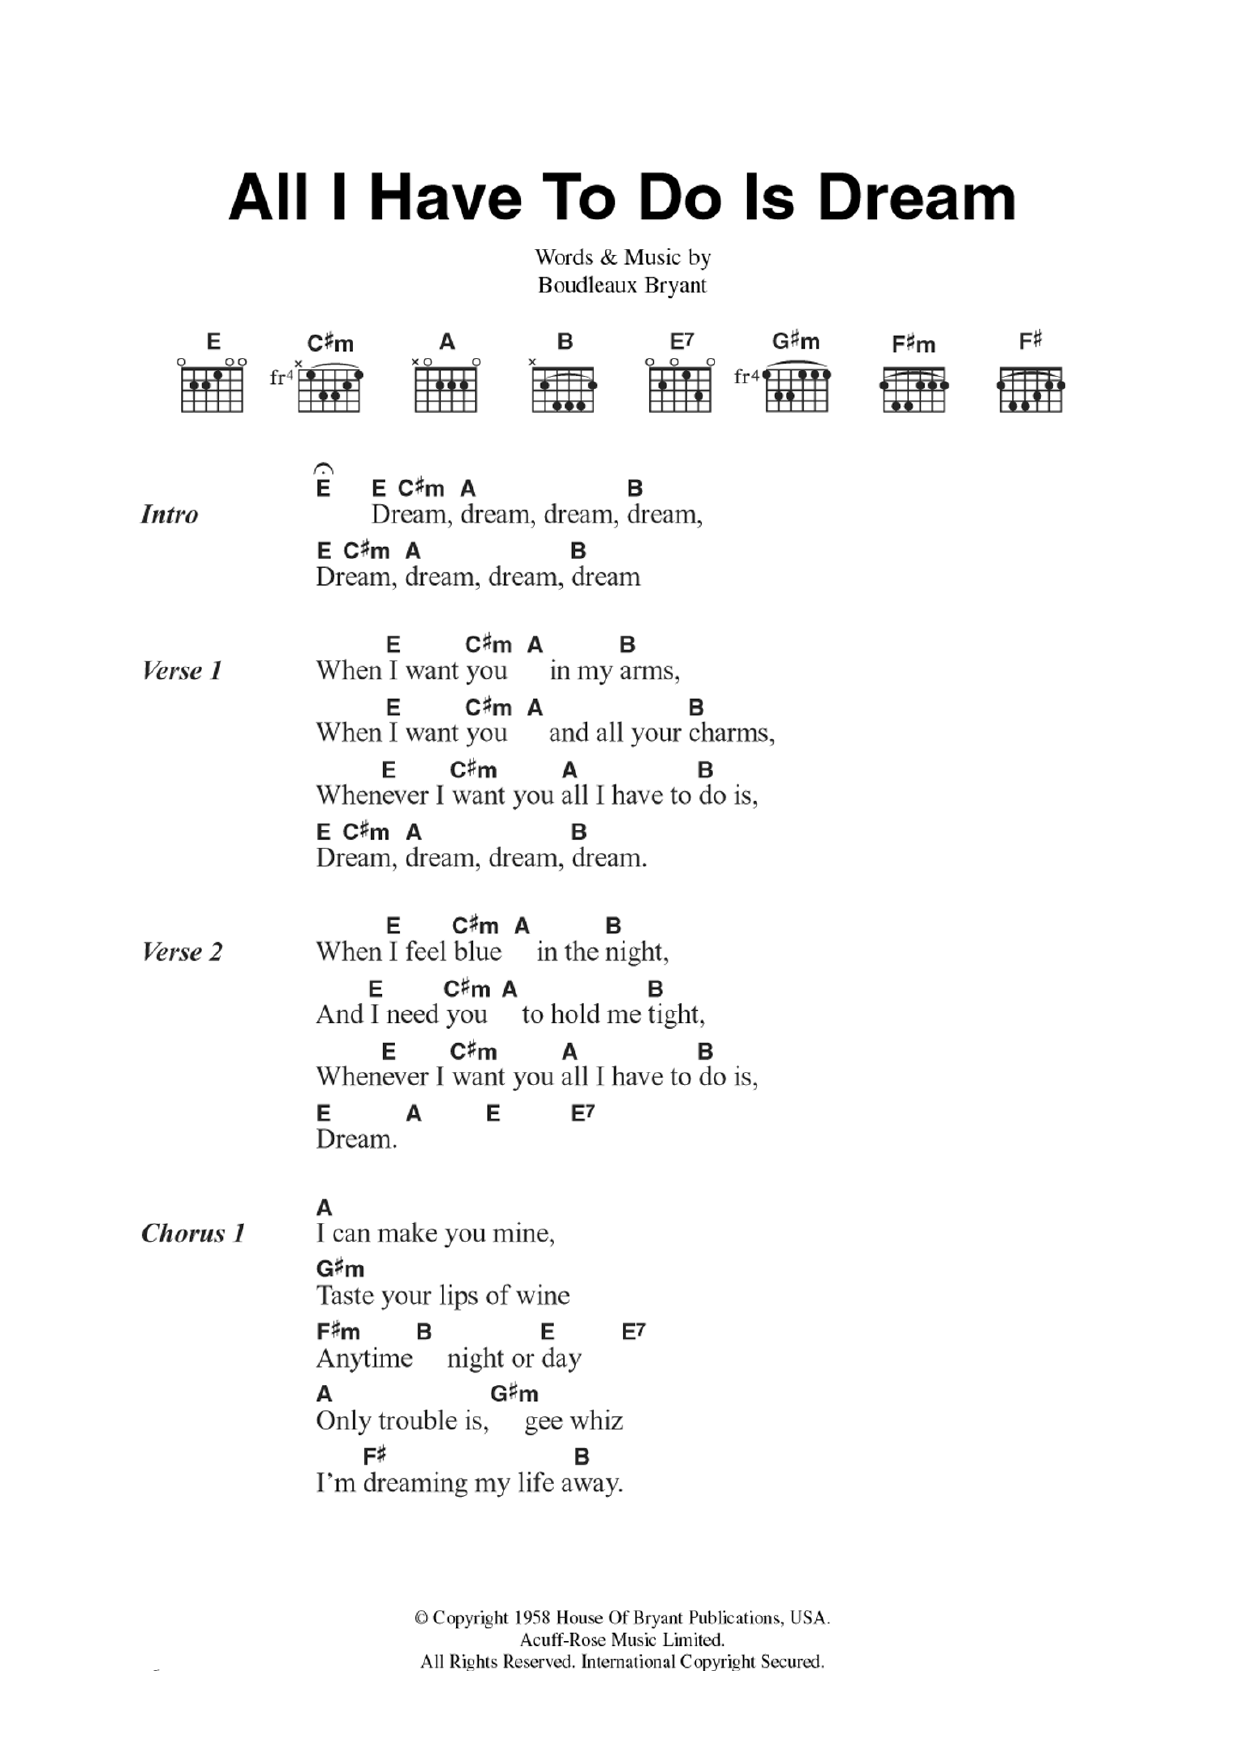 Download The Everly Brothers All I Have To Do Is Dream Sheet Music